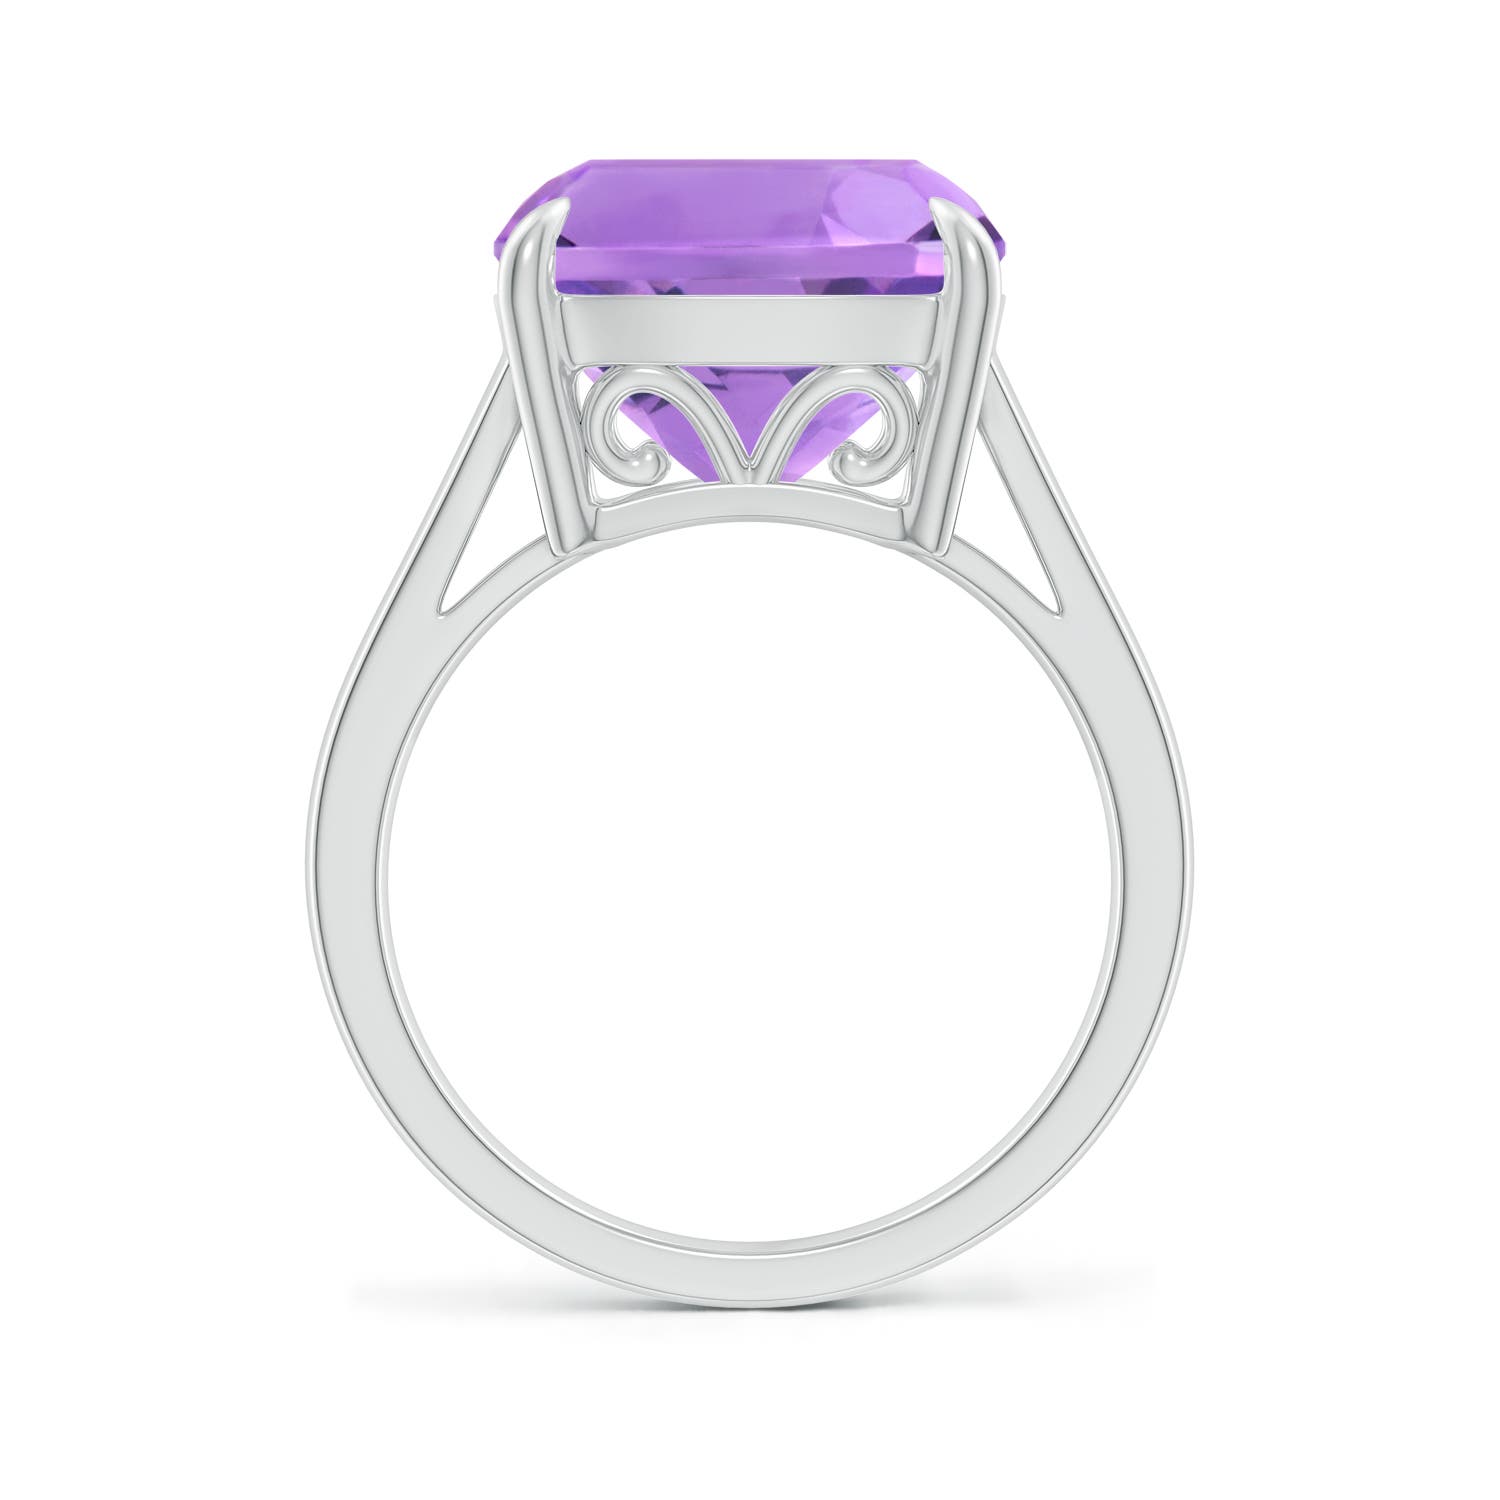 A - Amethyst / 6.15 CT / 14 KT White Gold